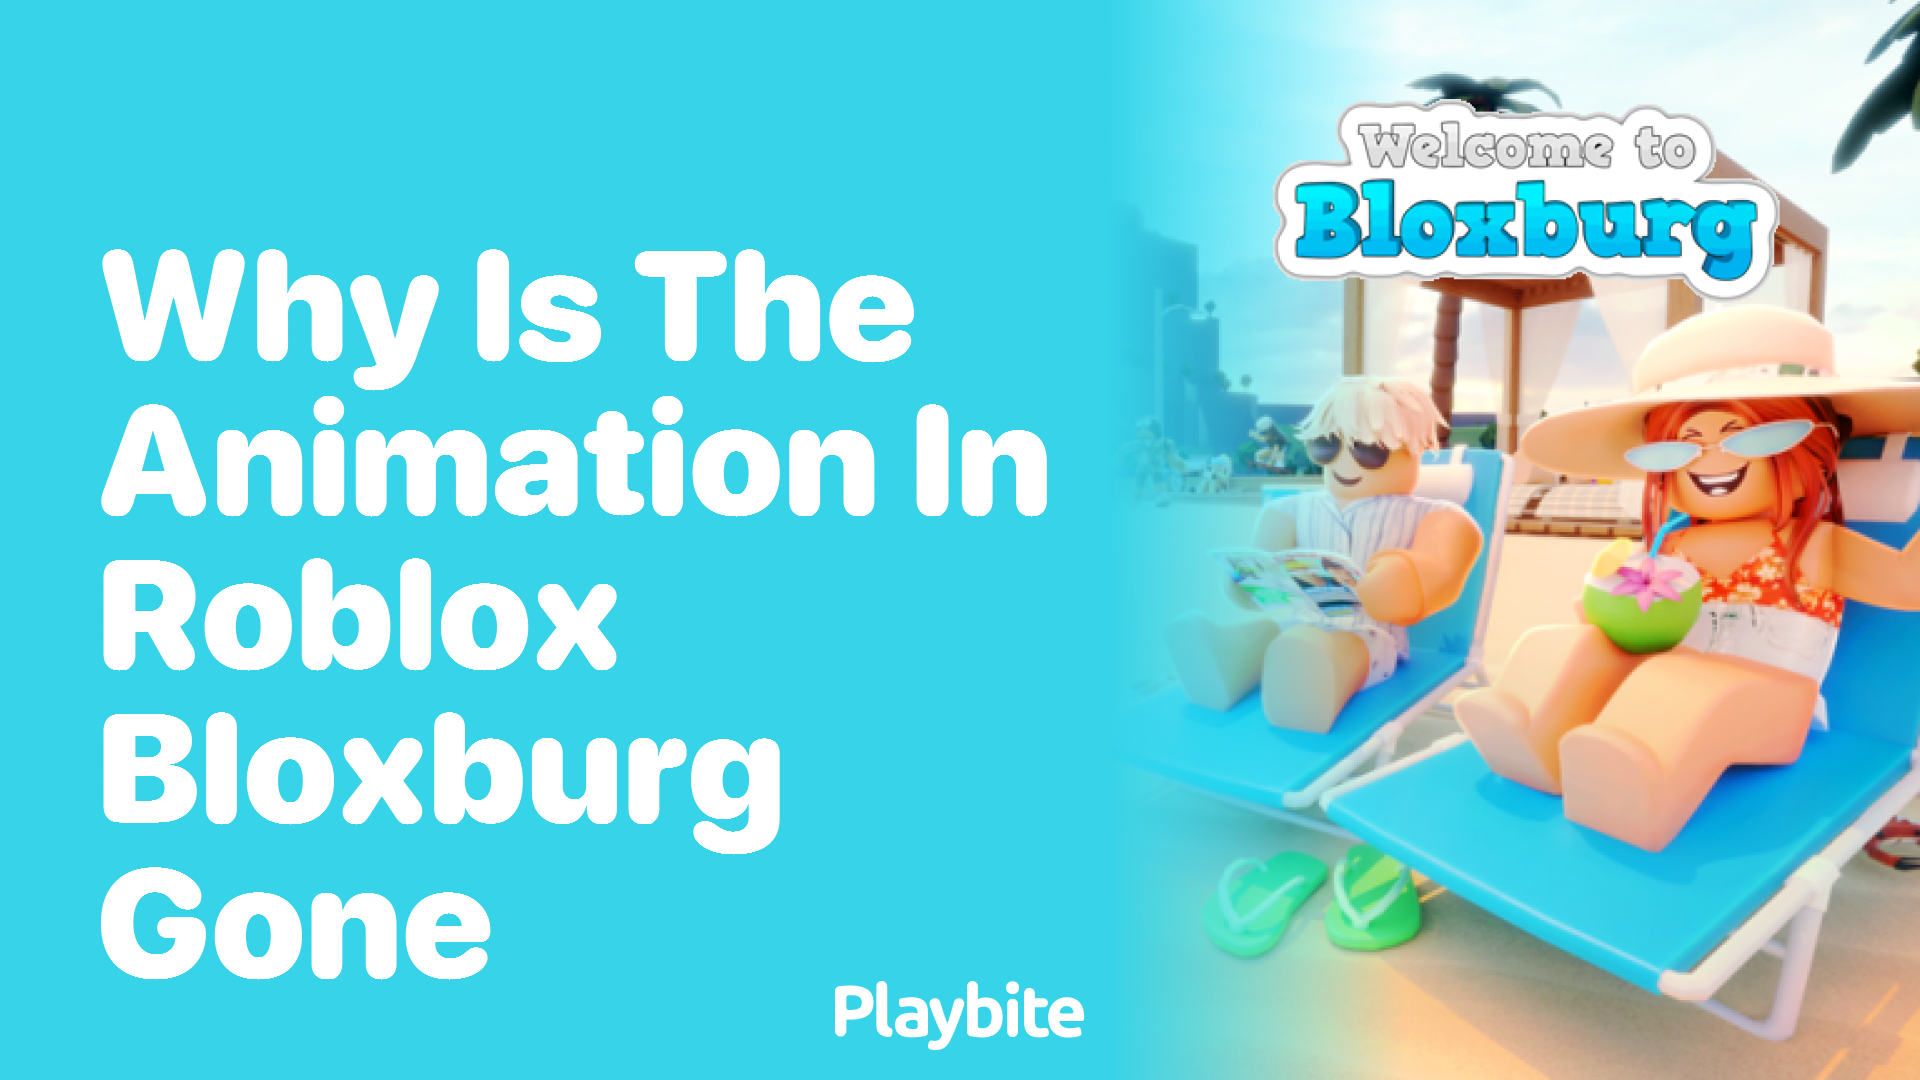 Why Is the Animation in Roblox Bloxburg Gone?